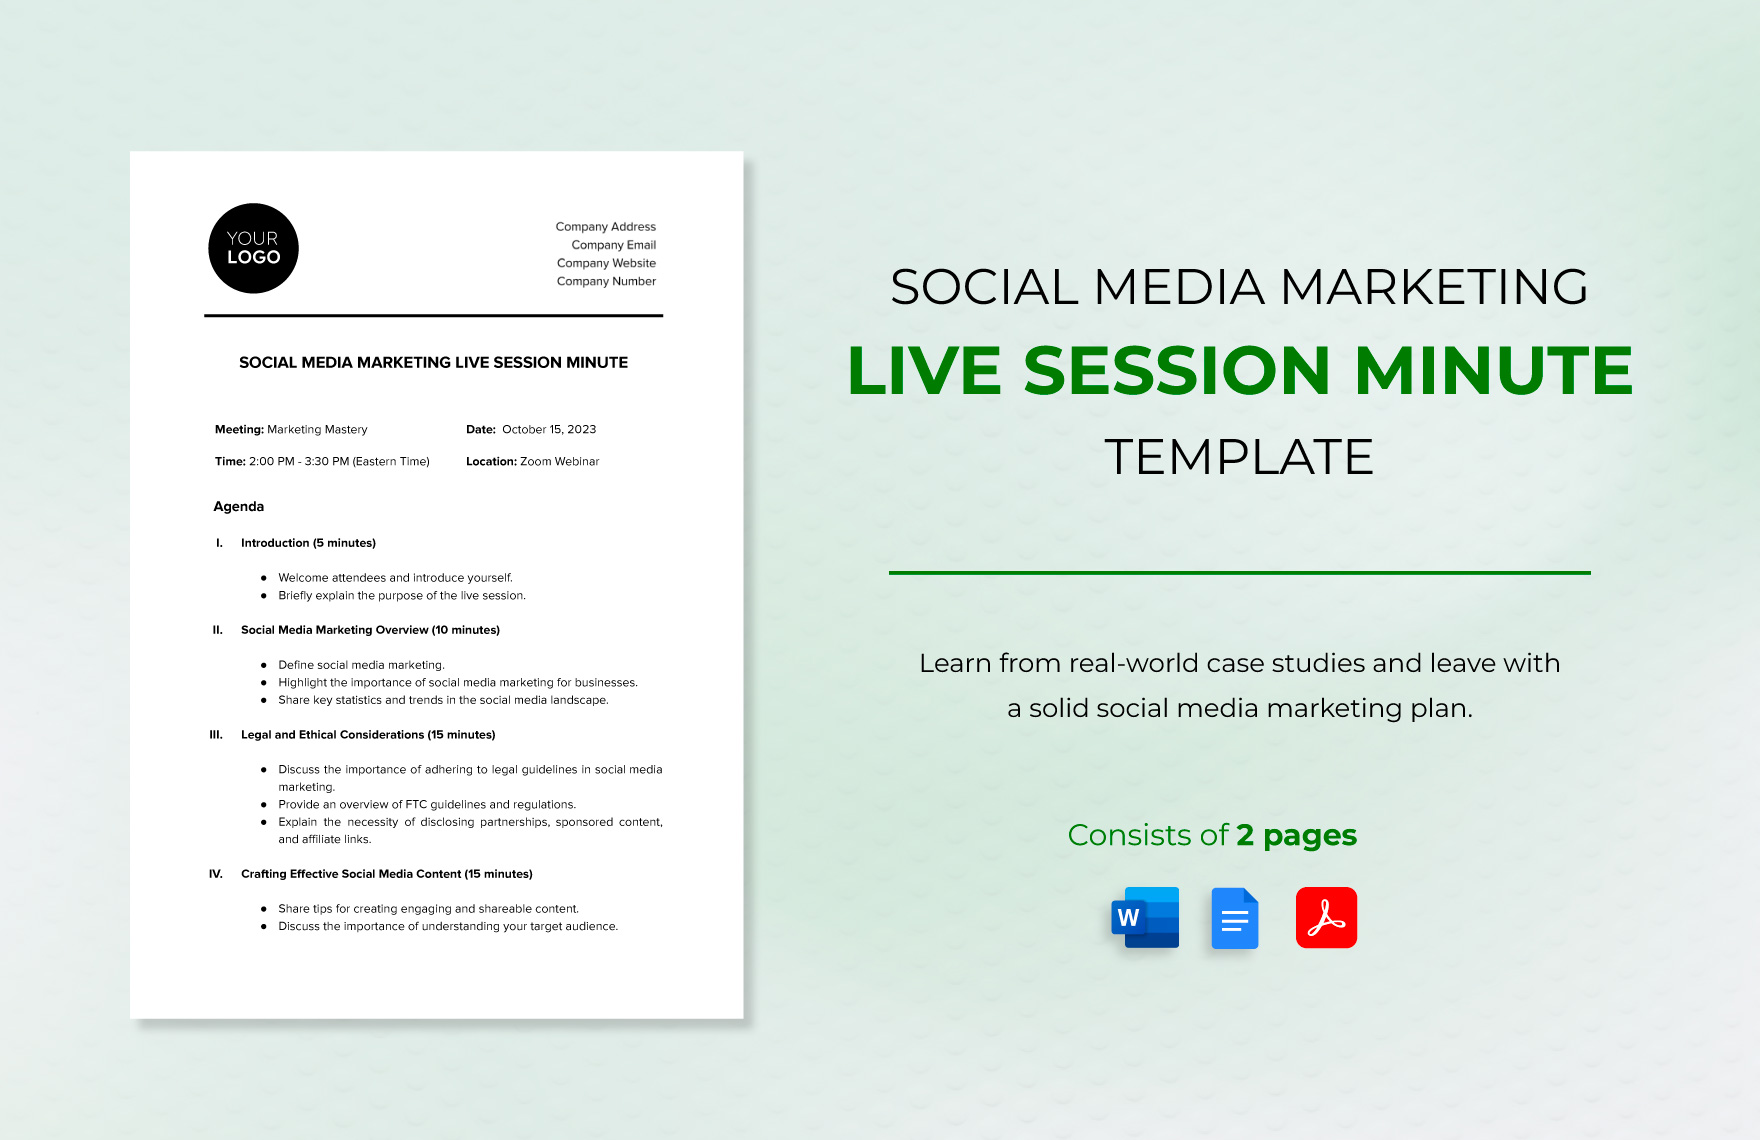 Social Media Marketing Live Session Minute Template in Word, Google Docs, PDF